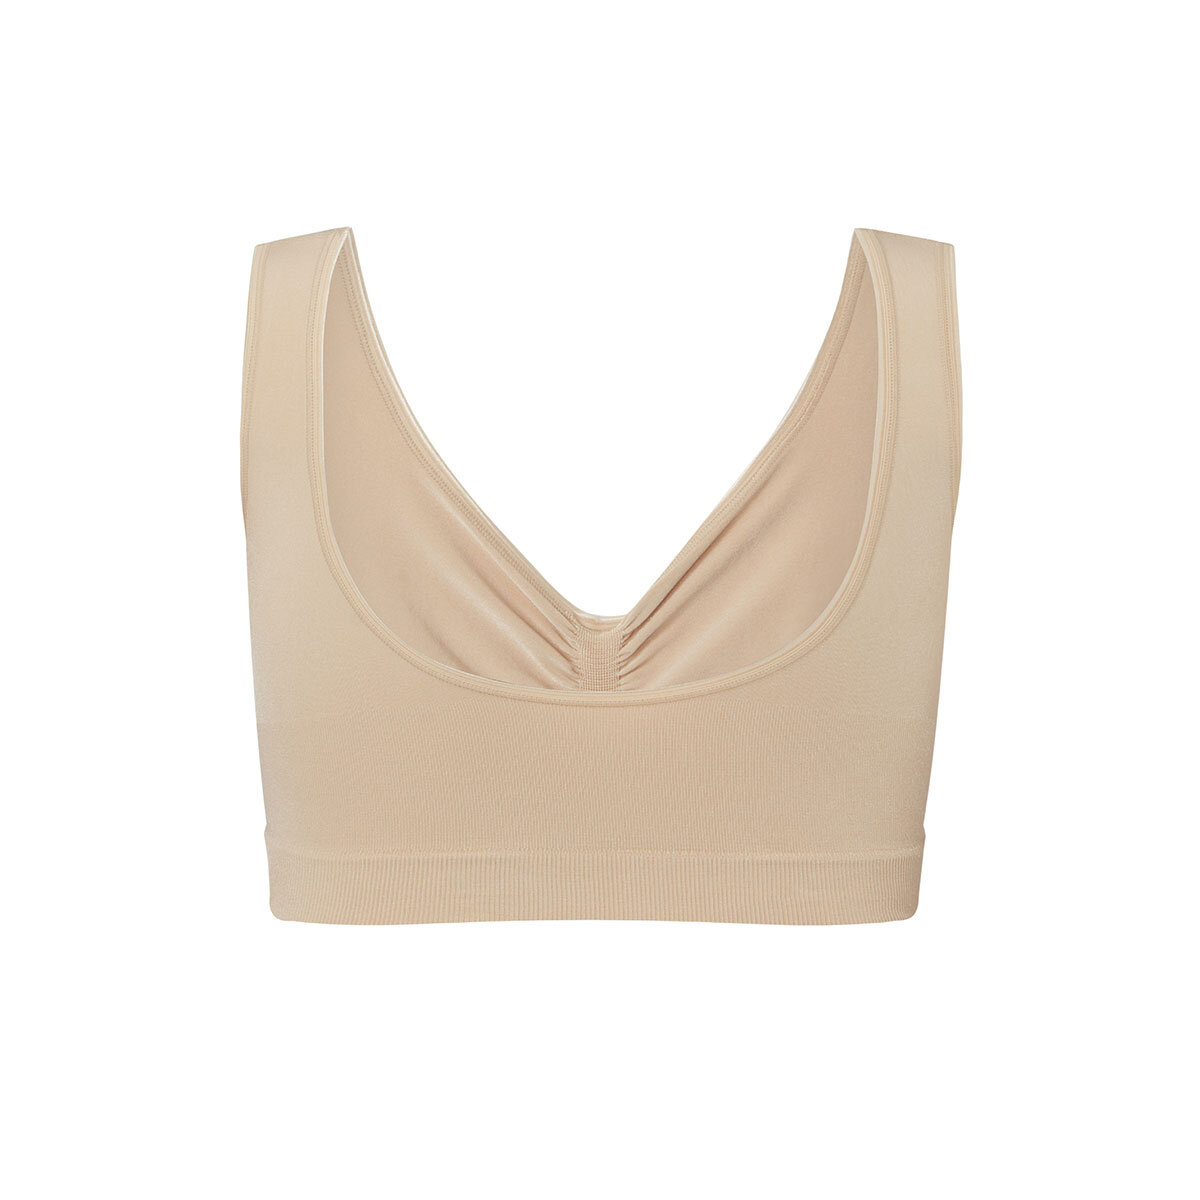 Evenlina Seamless Support Bralette in Almond - Small